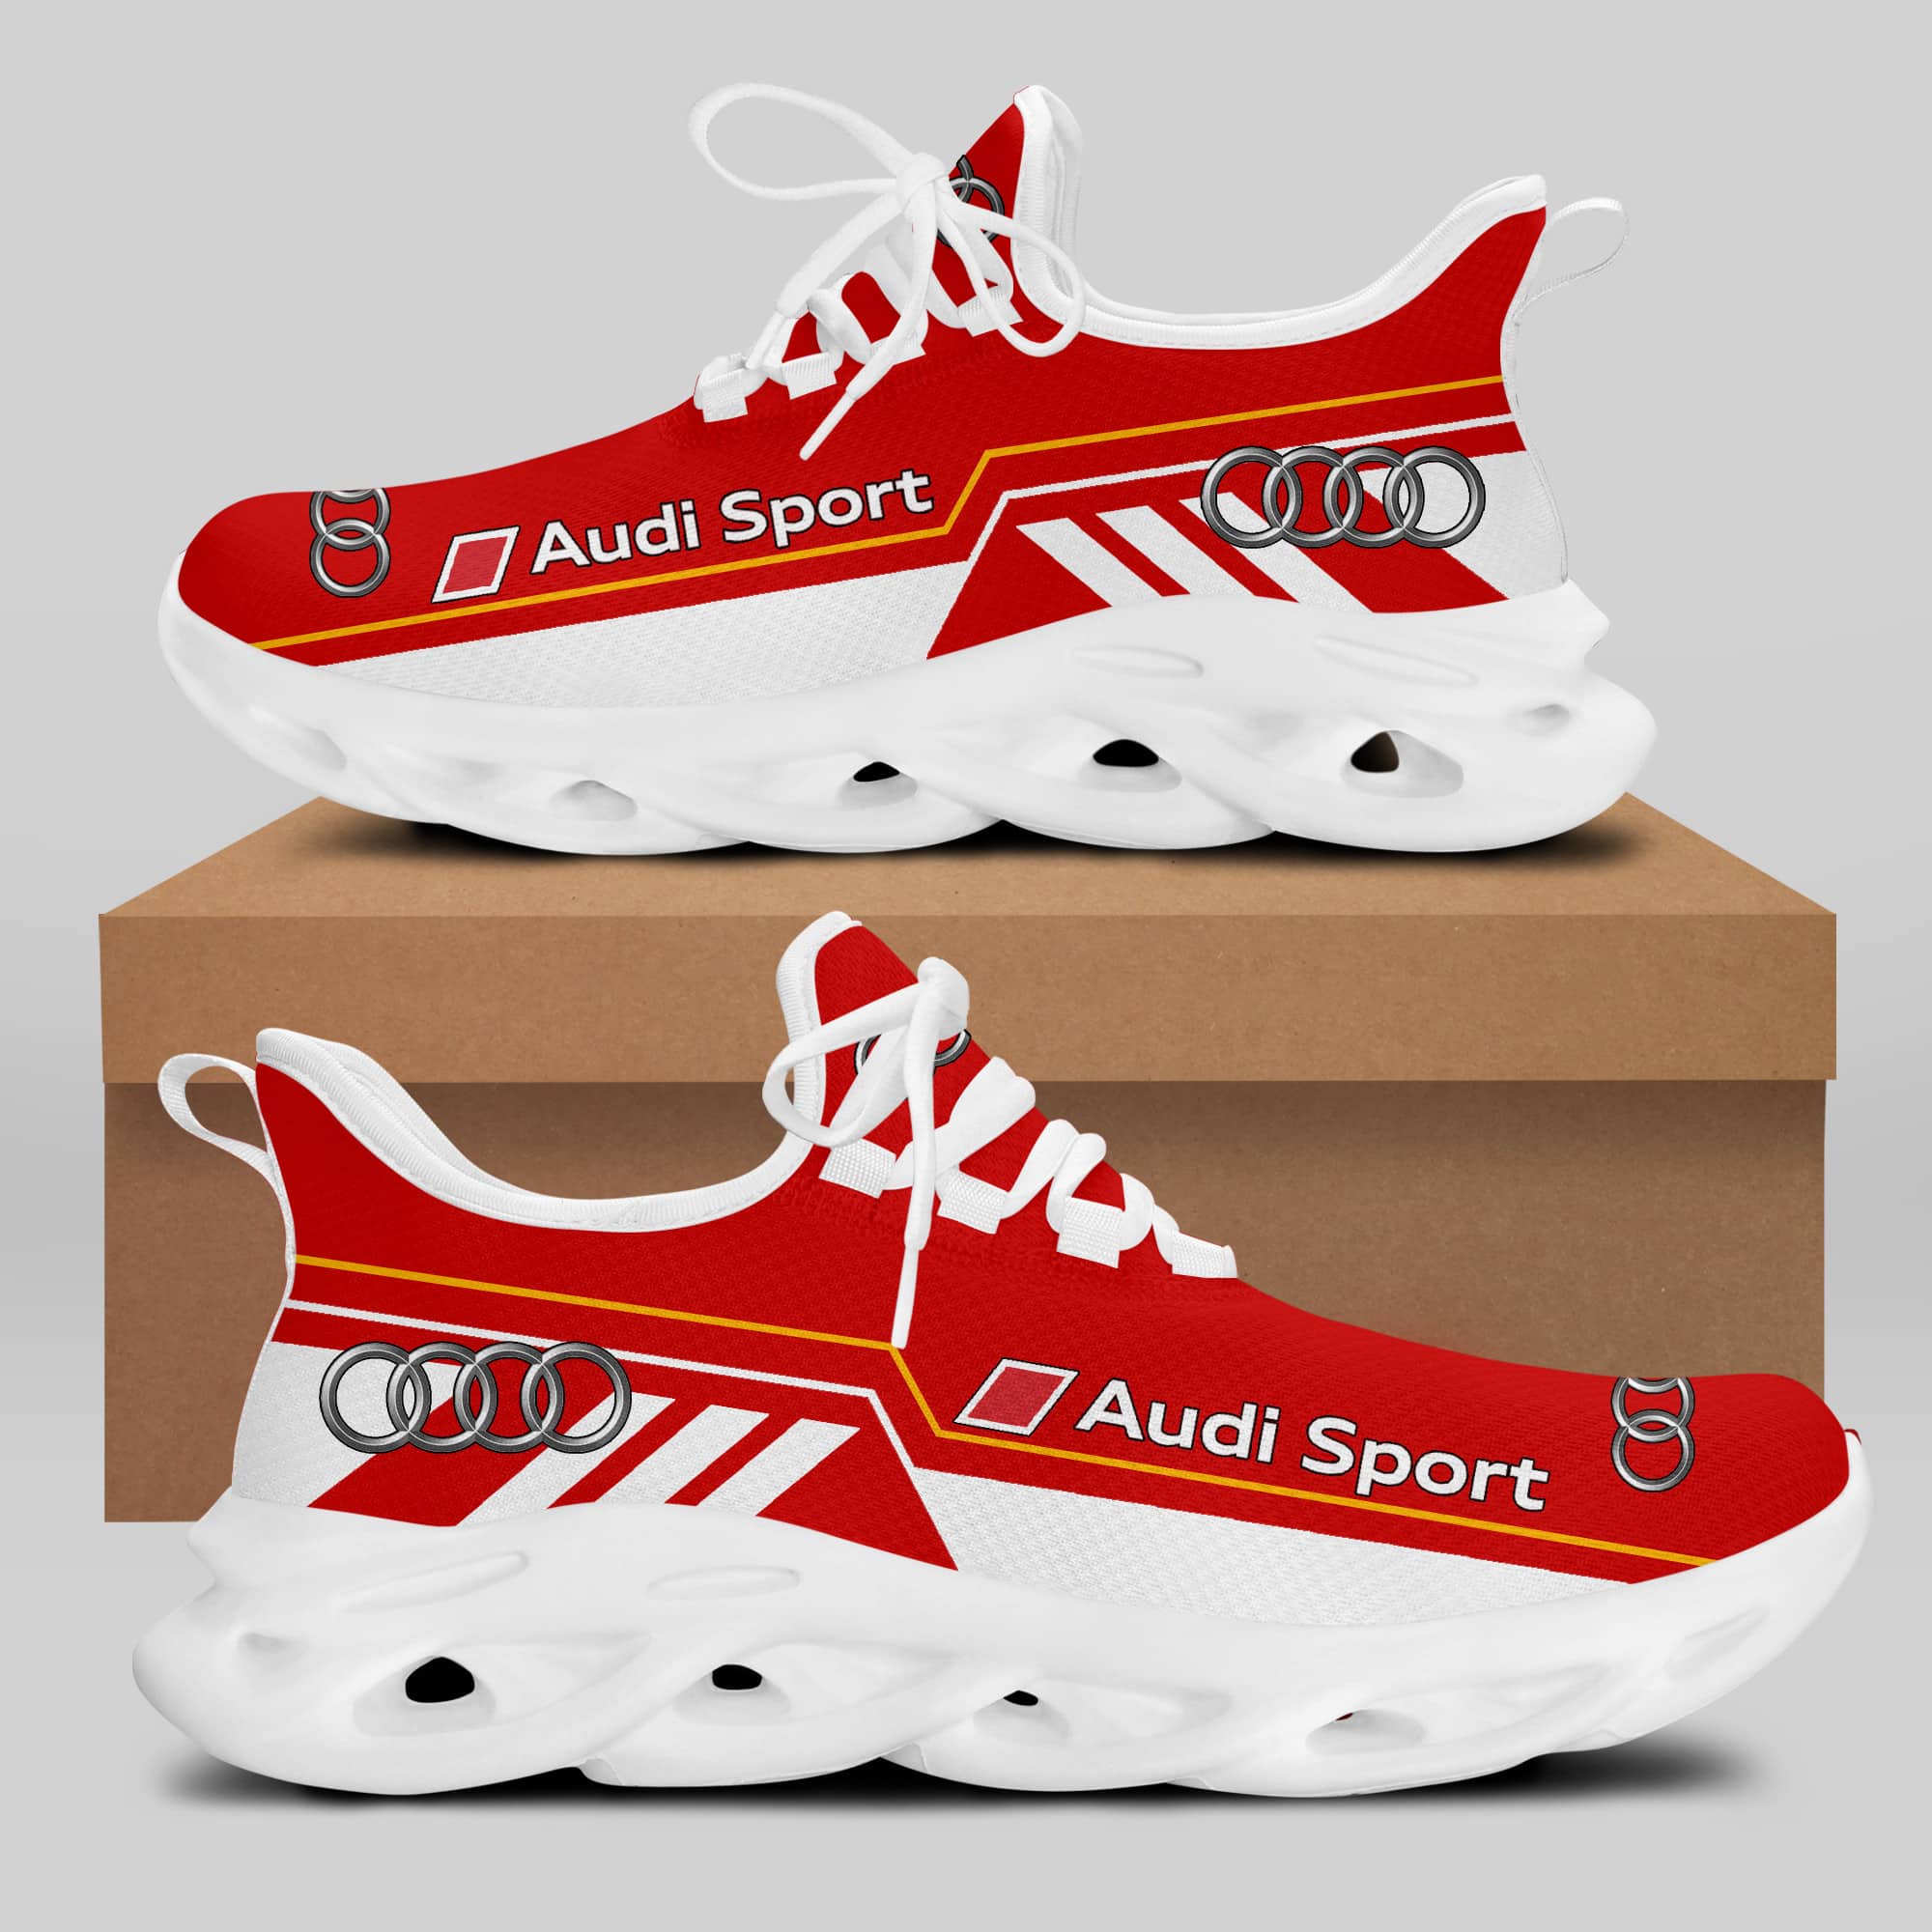 Audi Sport Running Shoes Max Soul Shoes Sneakers Ver 14 1